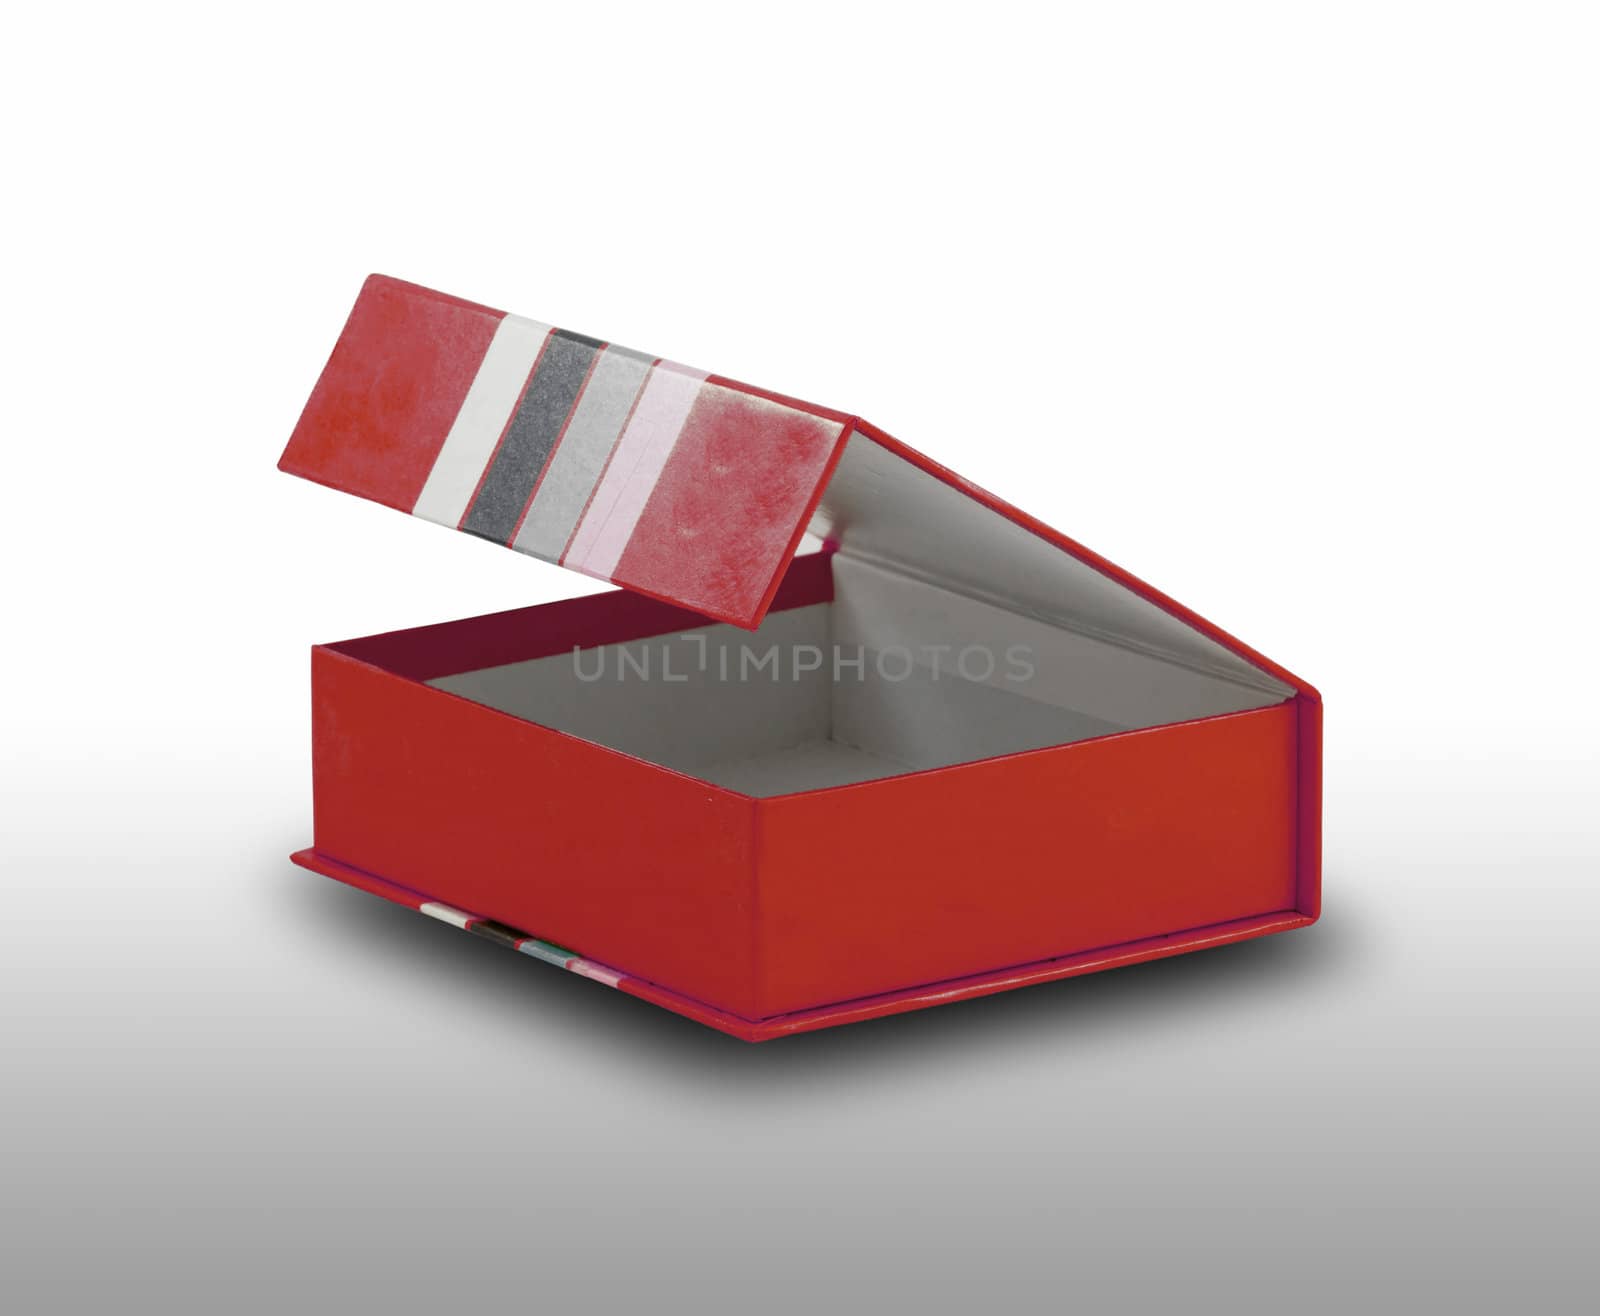 open red box on white background